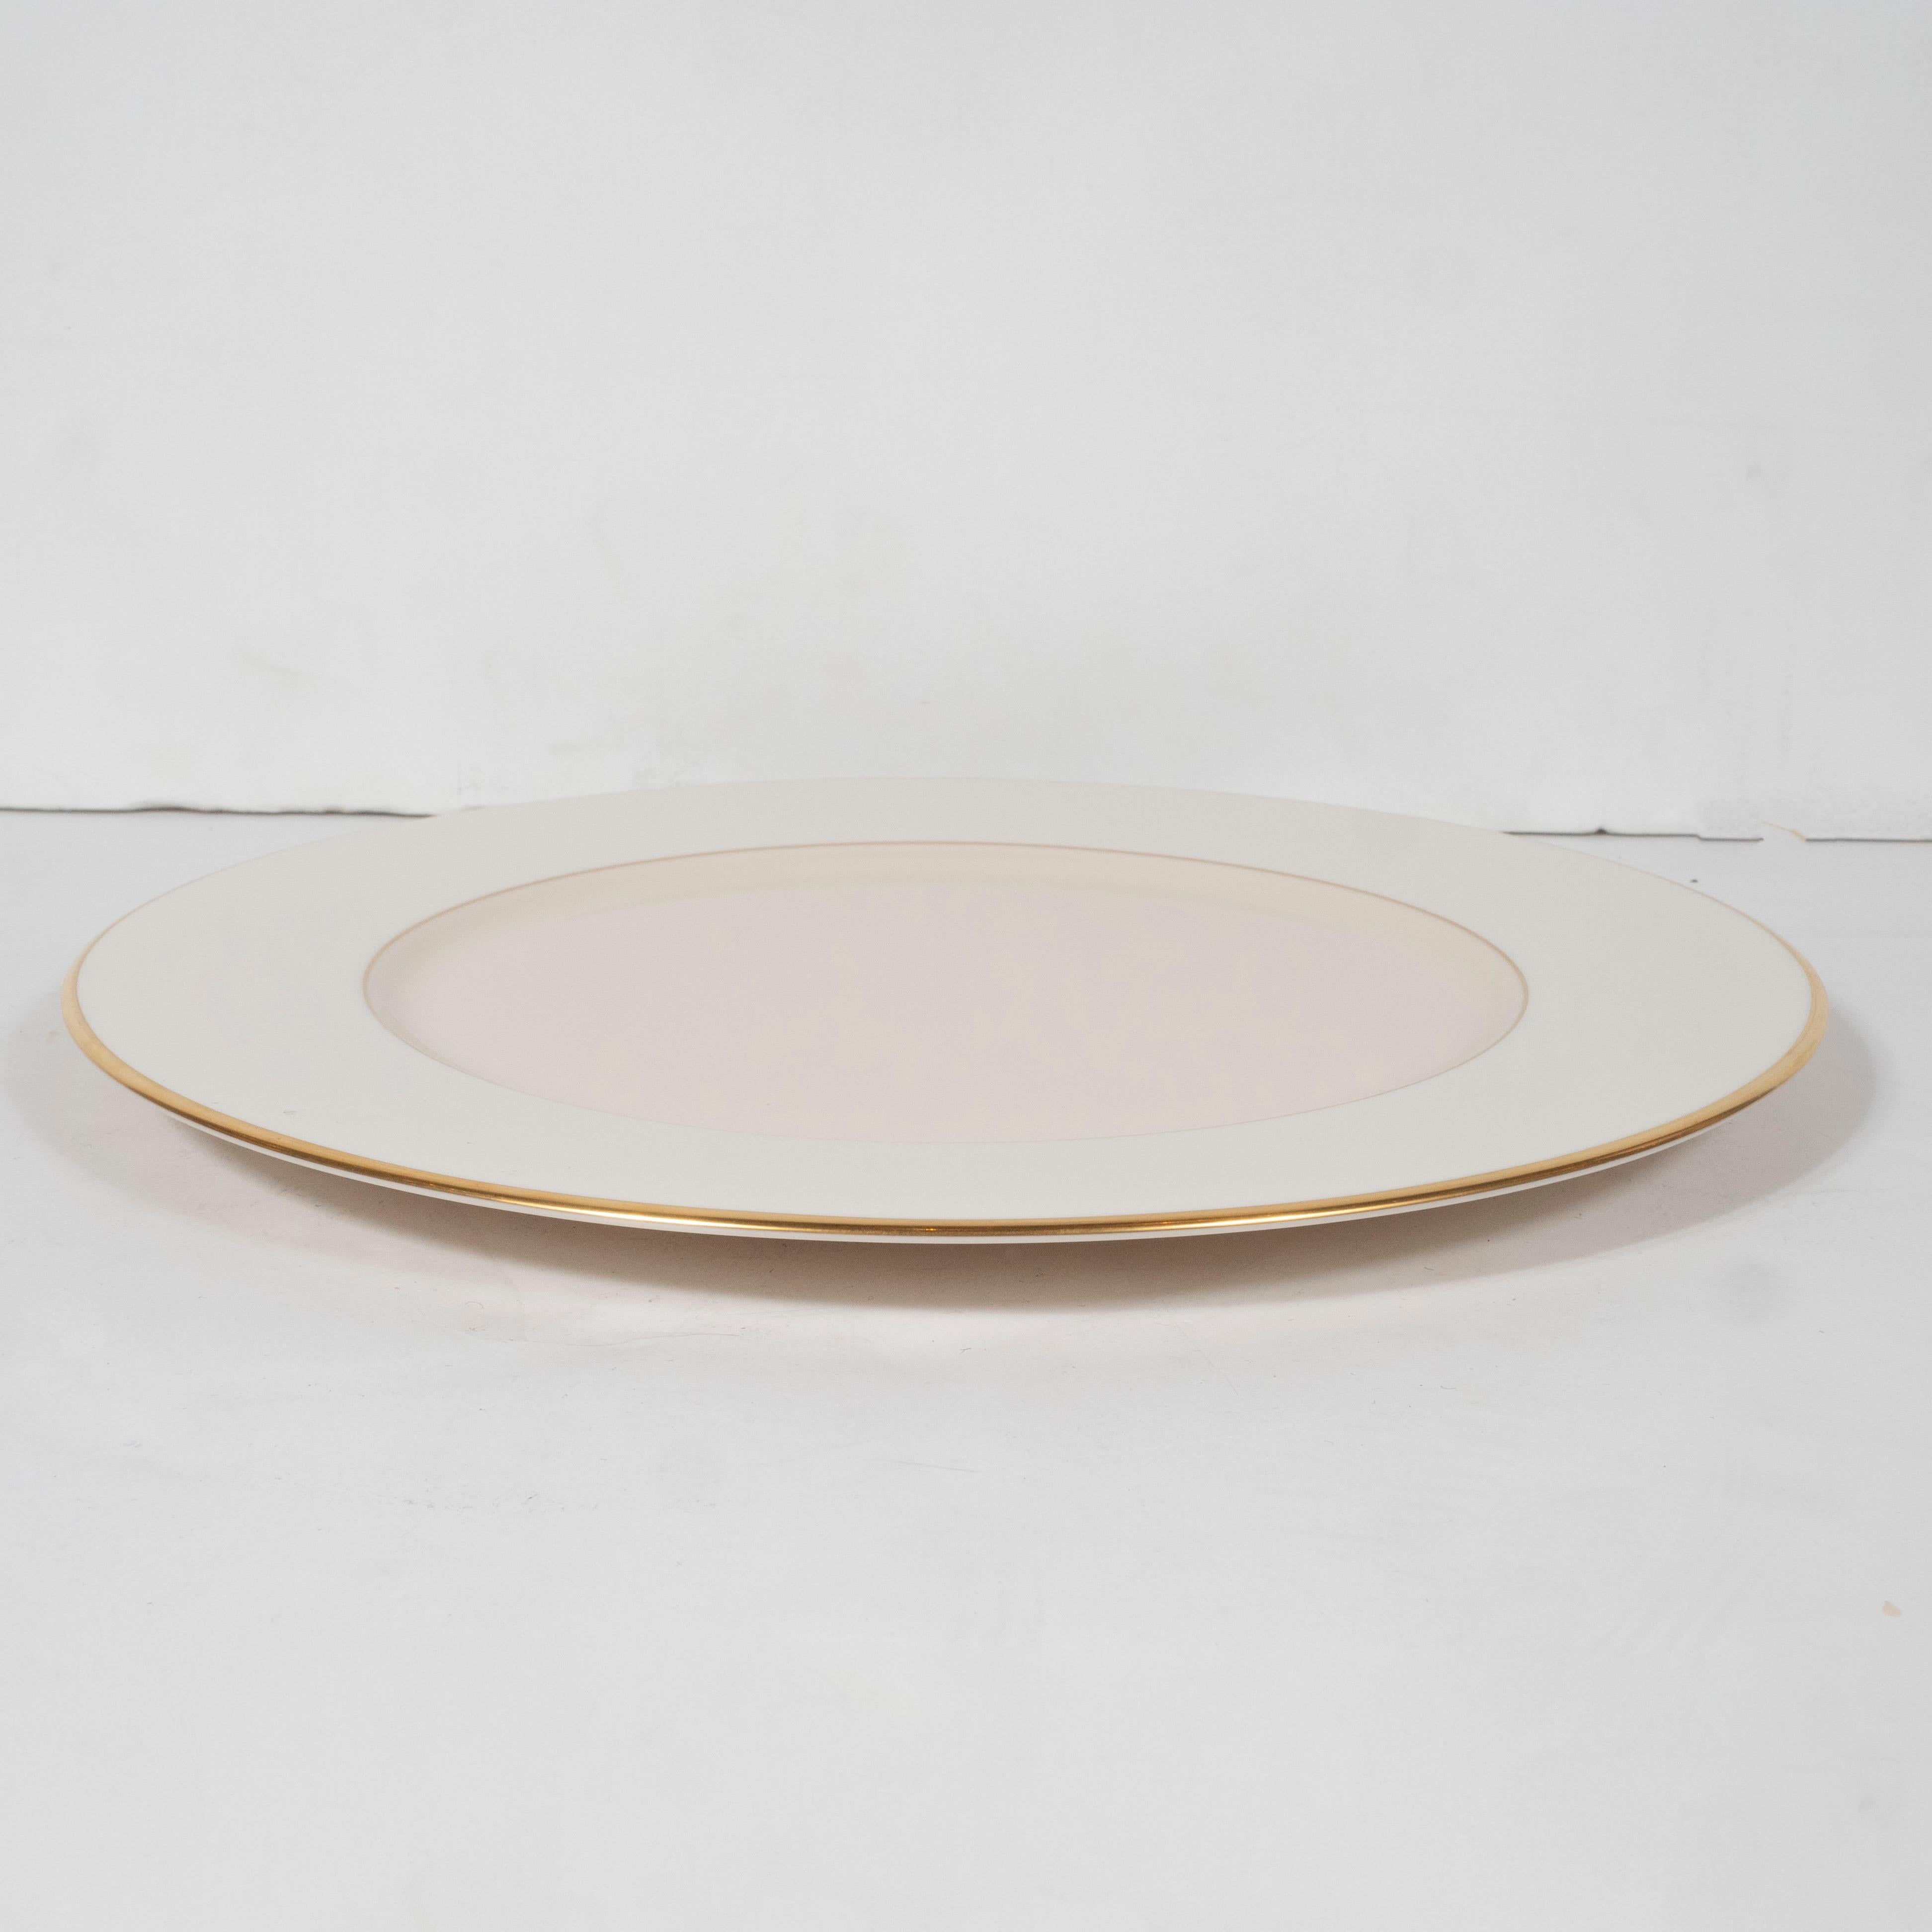 American Set of Six Modernist Charger Plates in 24-Karat Gold and Bone China by Lenox